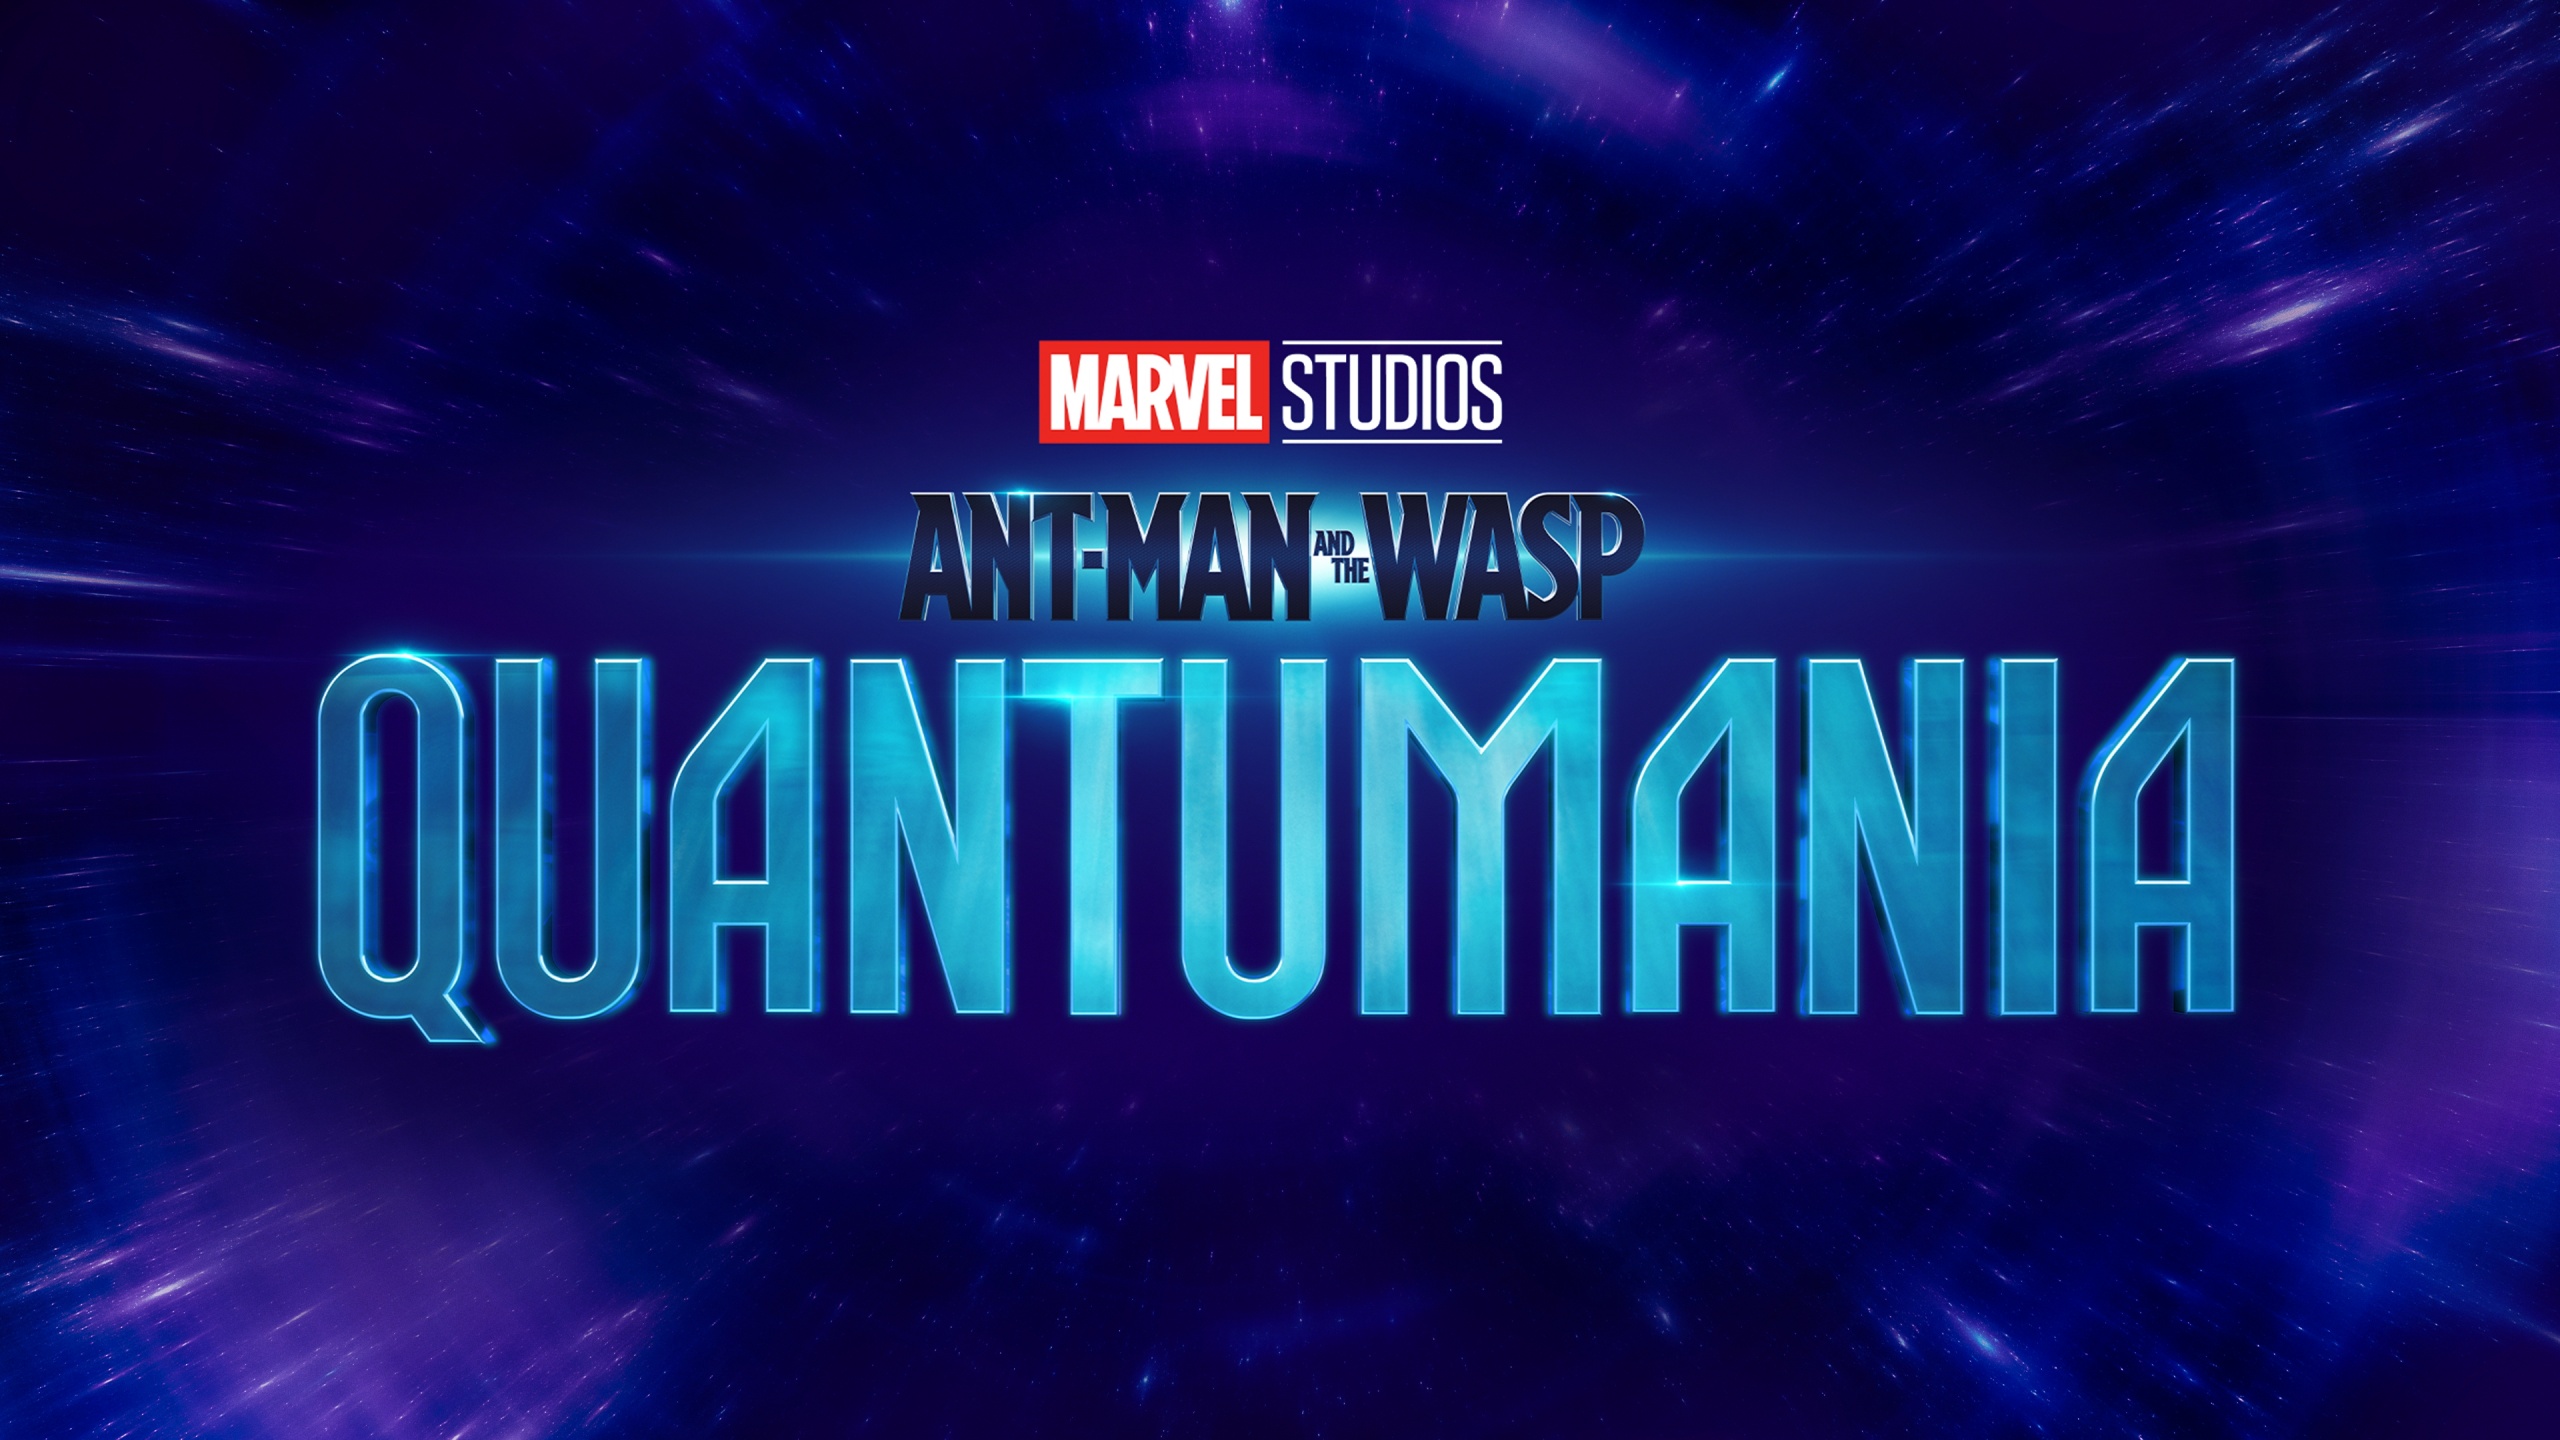 Ant Man And The Wasp: Quantumania Wallpaper 4K, Marvel Comics, Movies